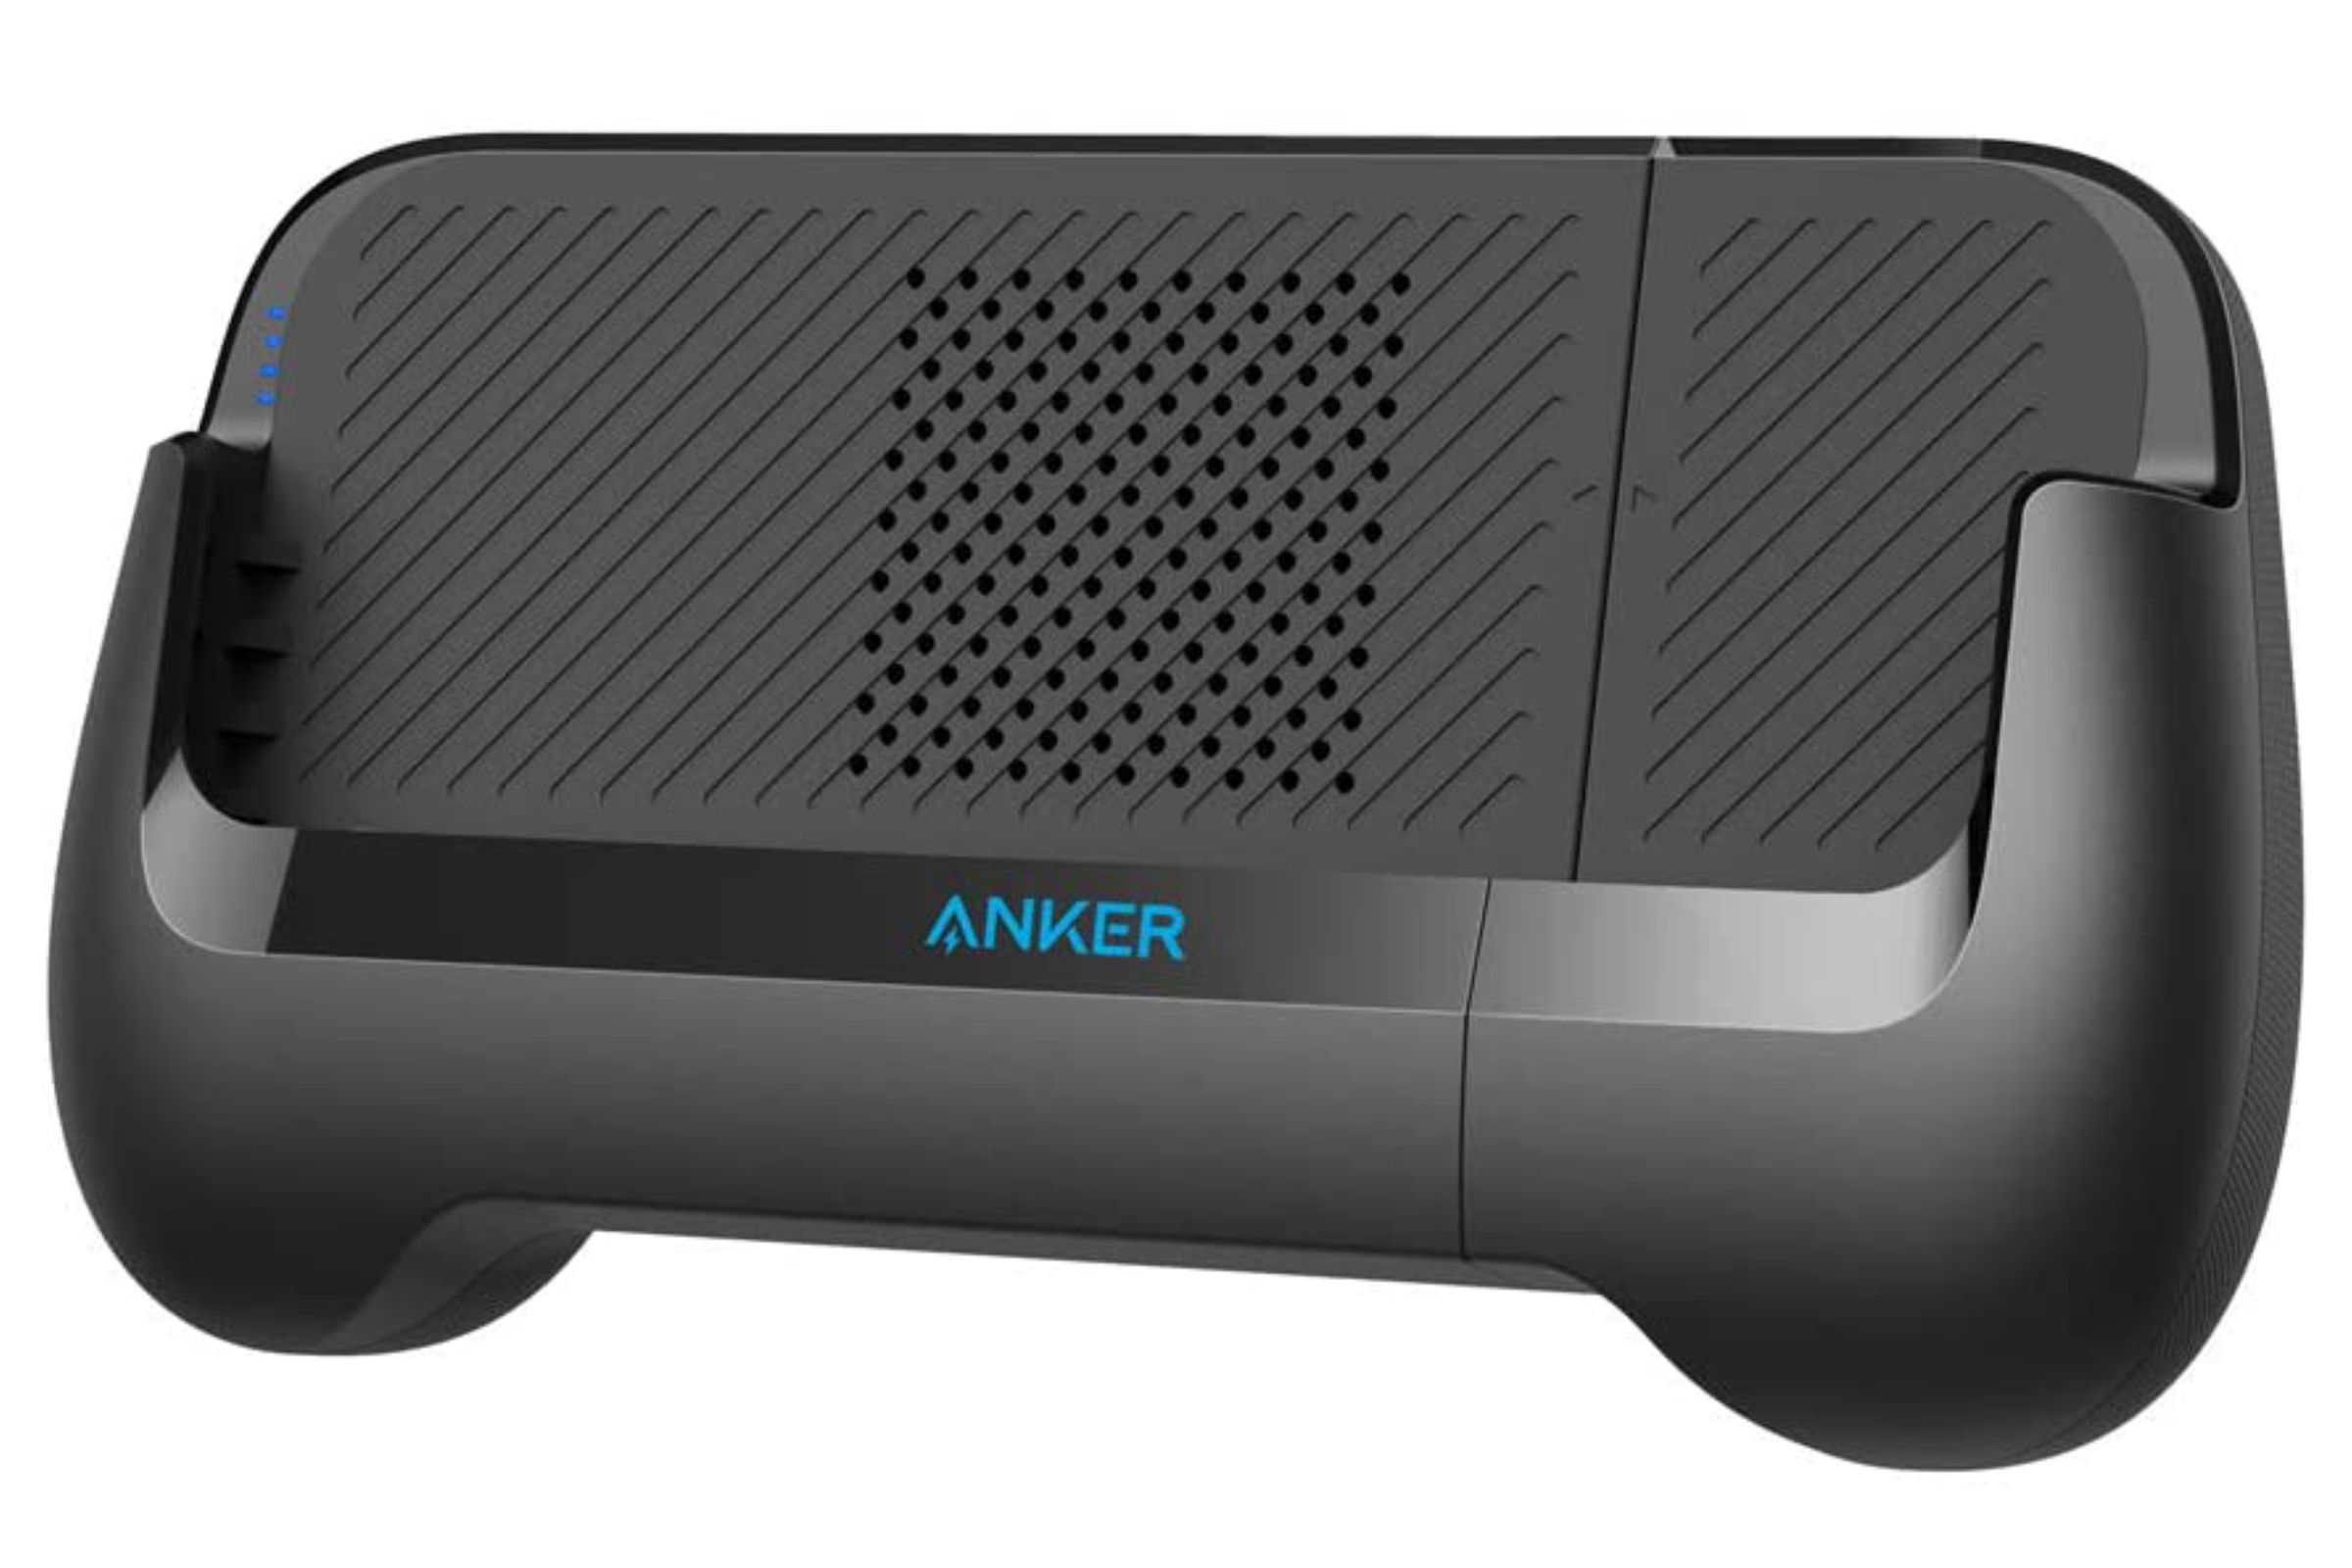 The Anker PowerCore Play 6K is one of many controllers without buttons you’ll find on Amazon